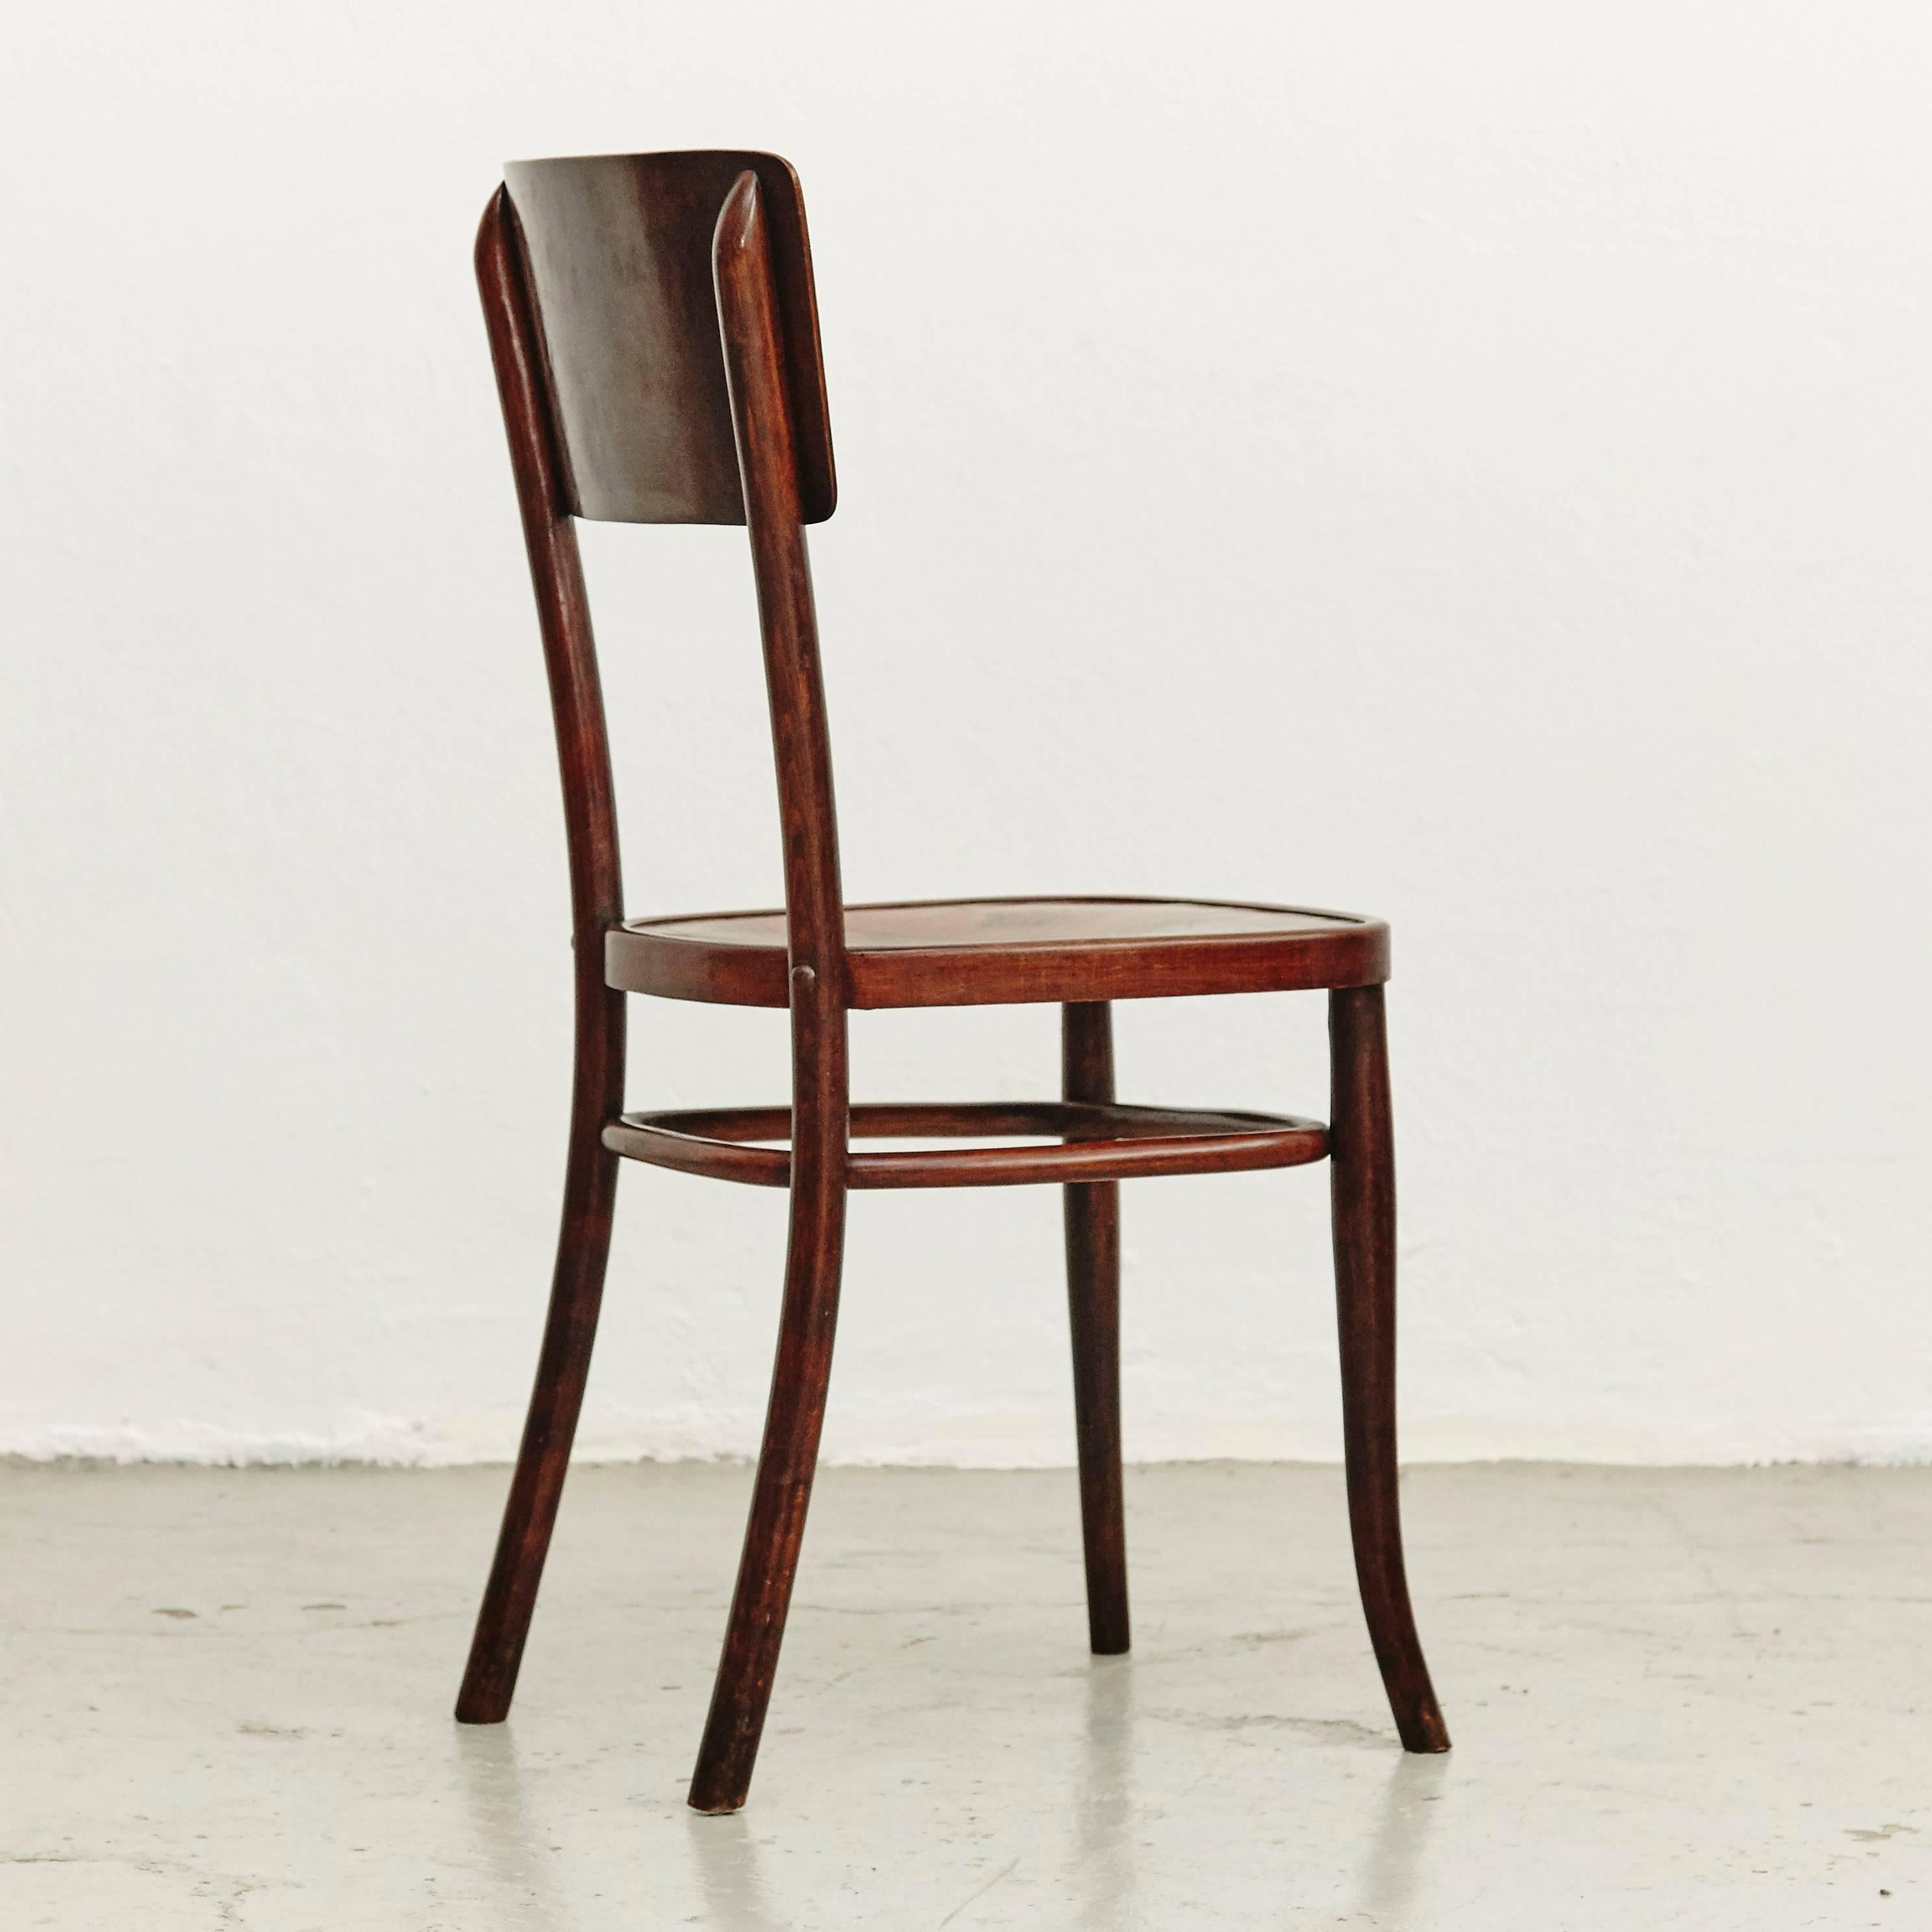 Mid-Century Modern Set of Six Chairs by August Thonet for Thonet, circa 1900